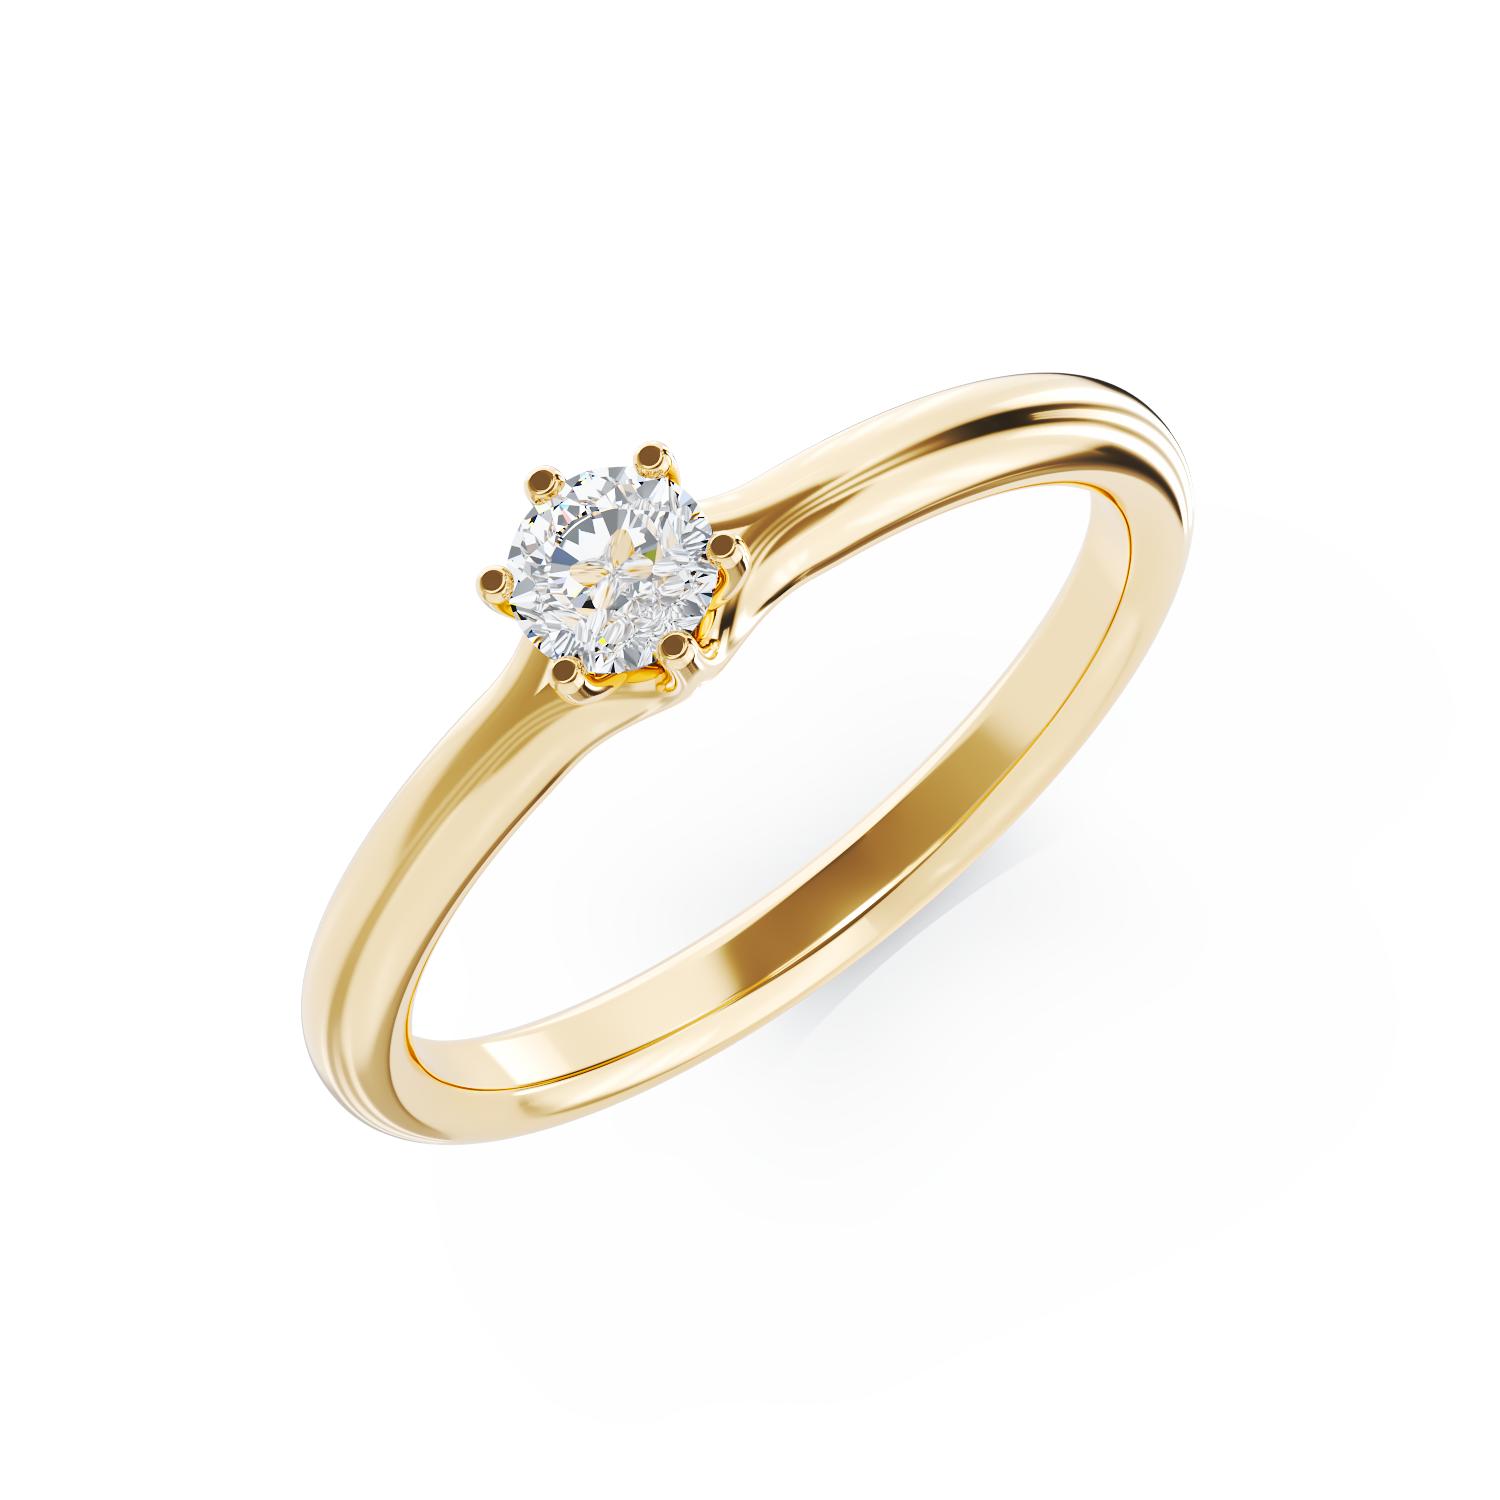 18K yellow gold engagement ring with a 0.14ct solitaire diamond